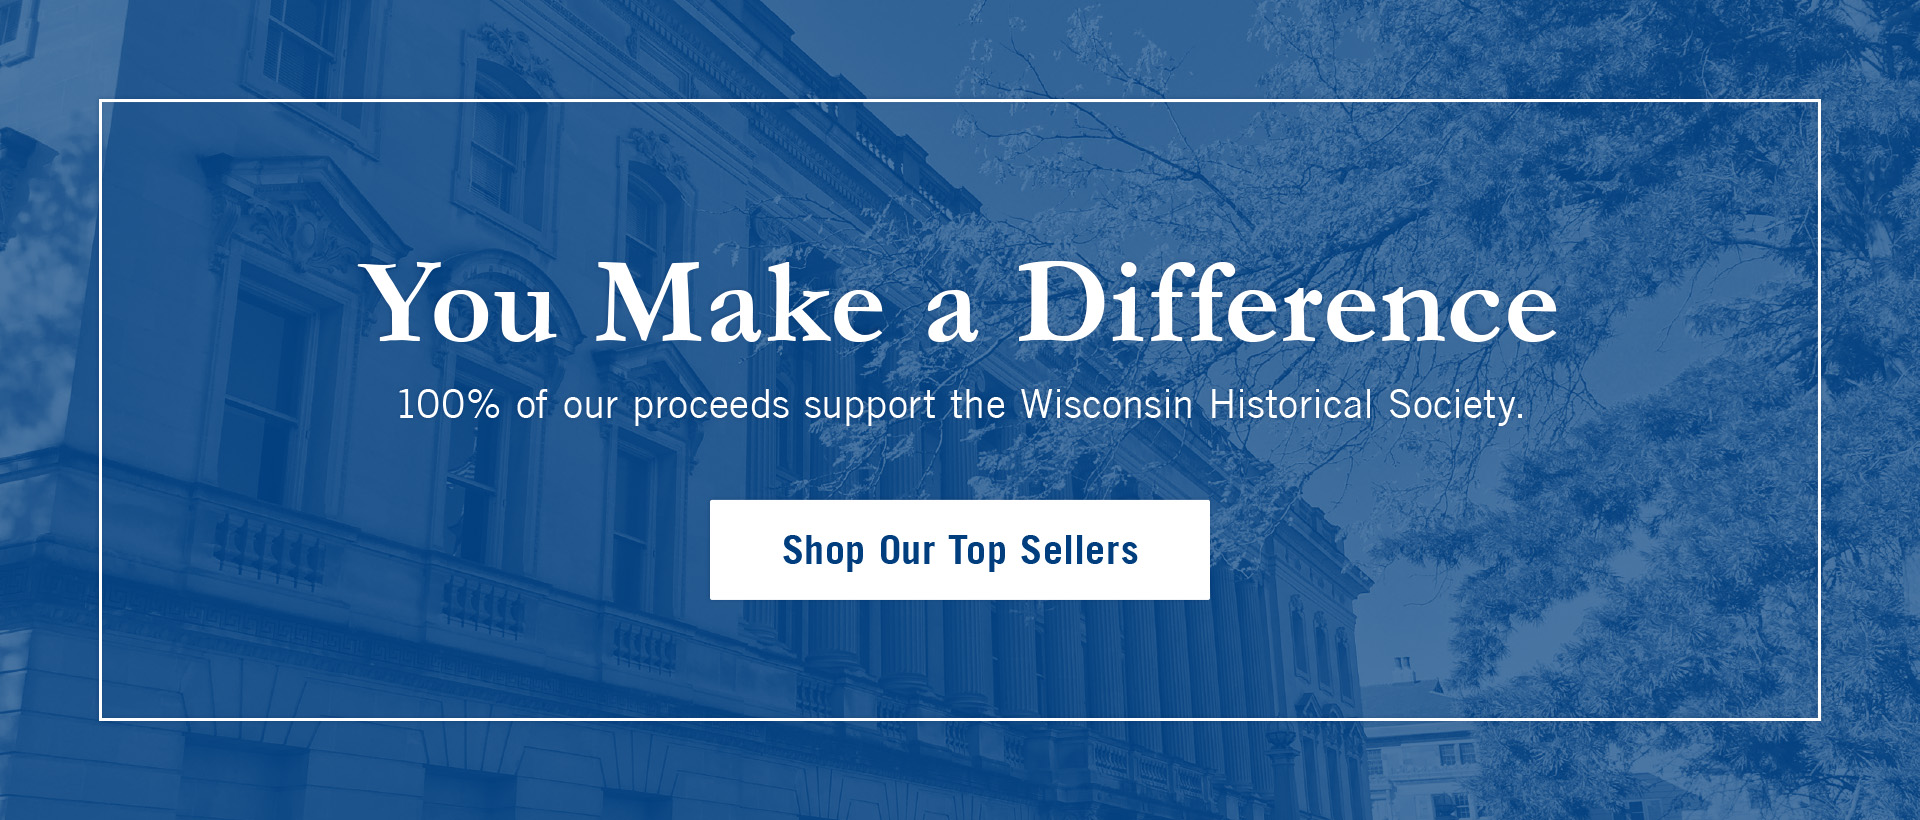 WHS online store banner that says "You Make a Difference" in white font over blue background.